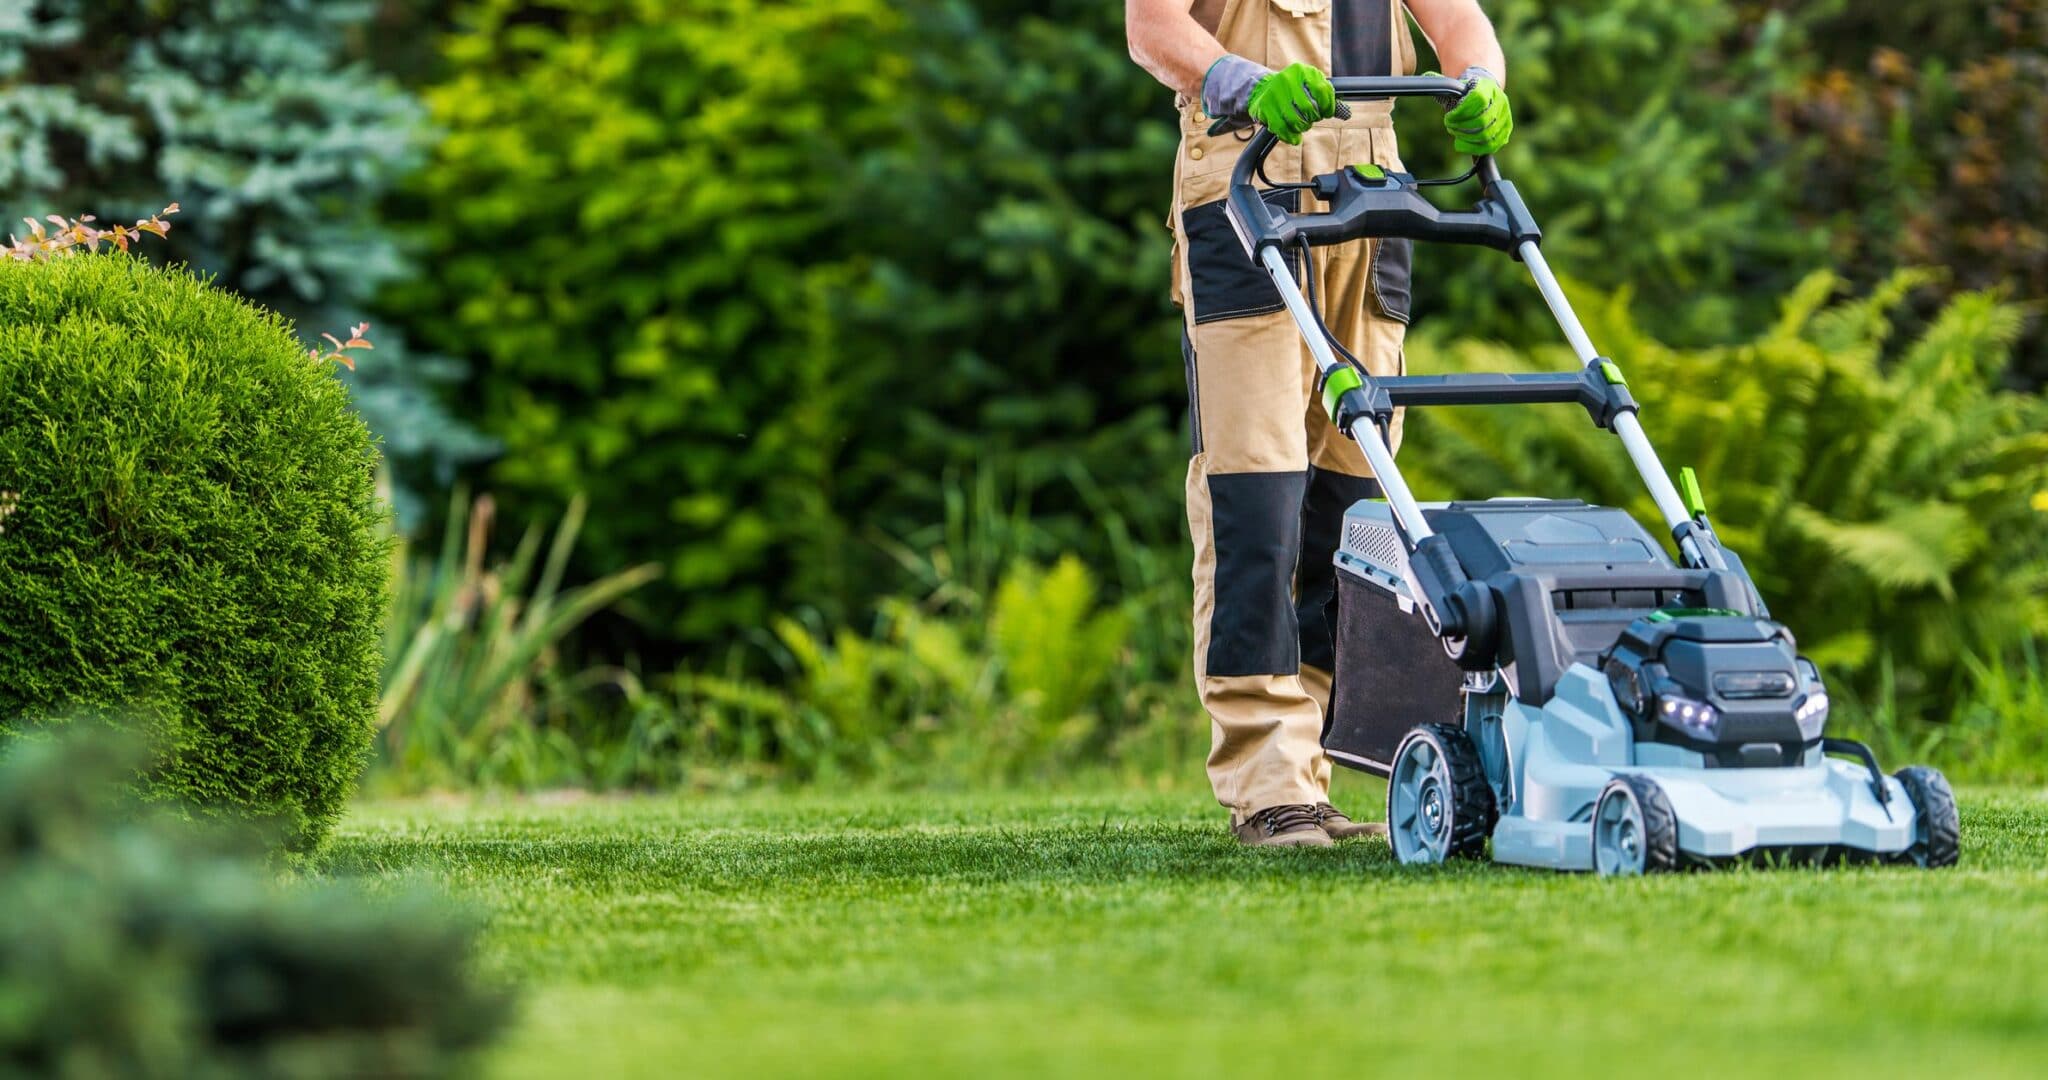 6 Best Electric Lawn Mowers & Lawn Maintenance Tools (2022) - EcoWatch